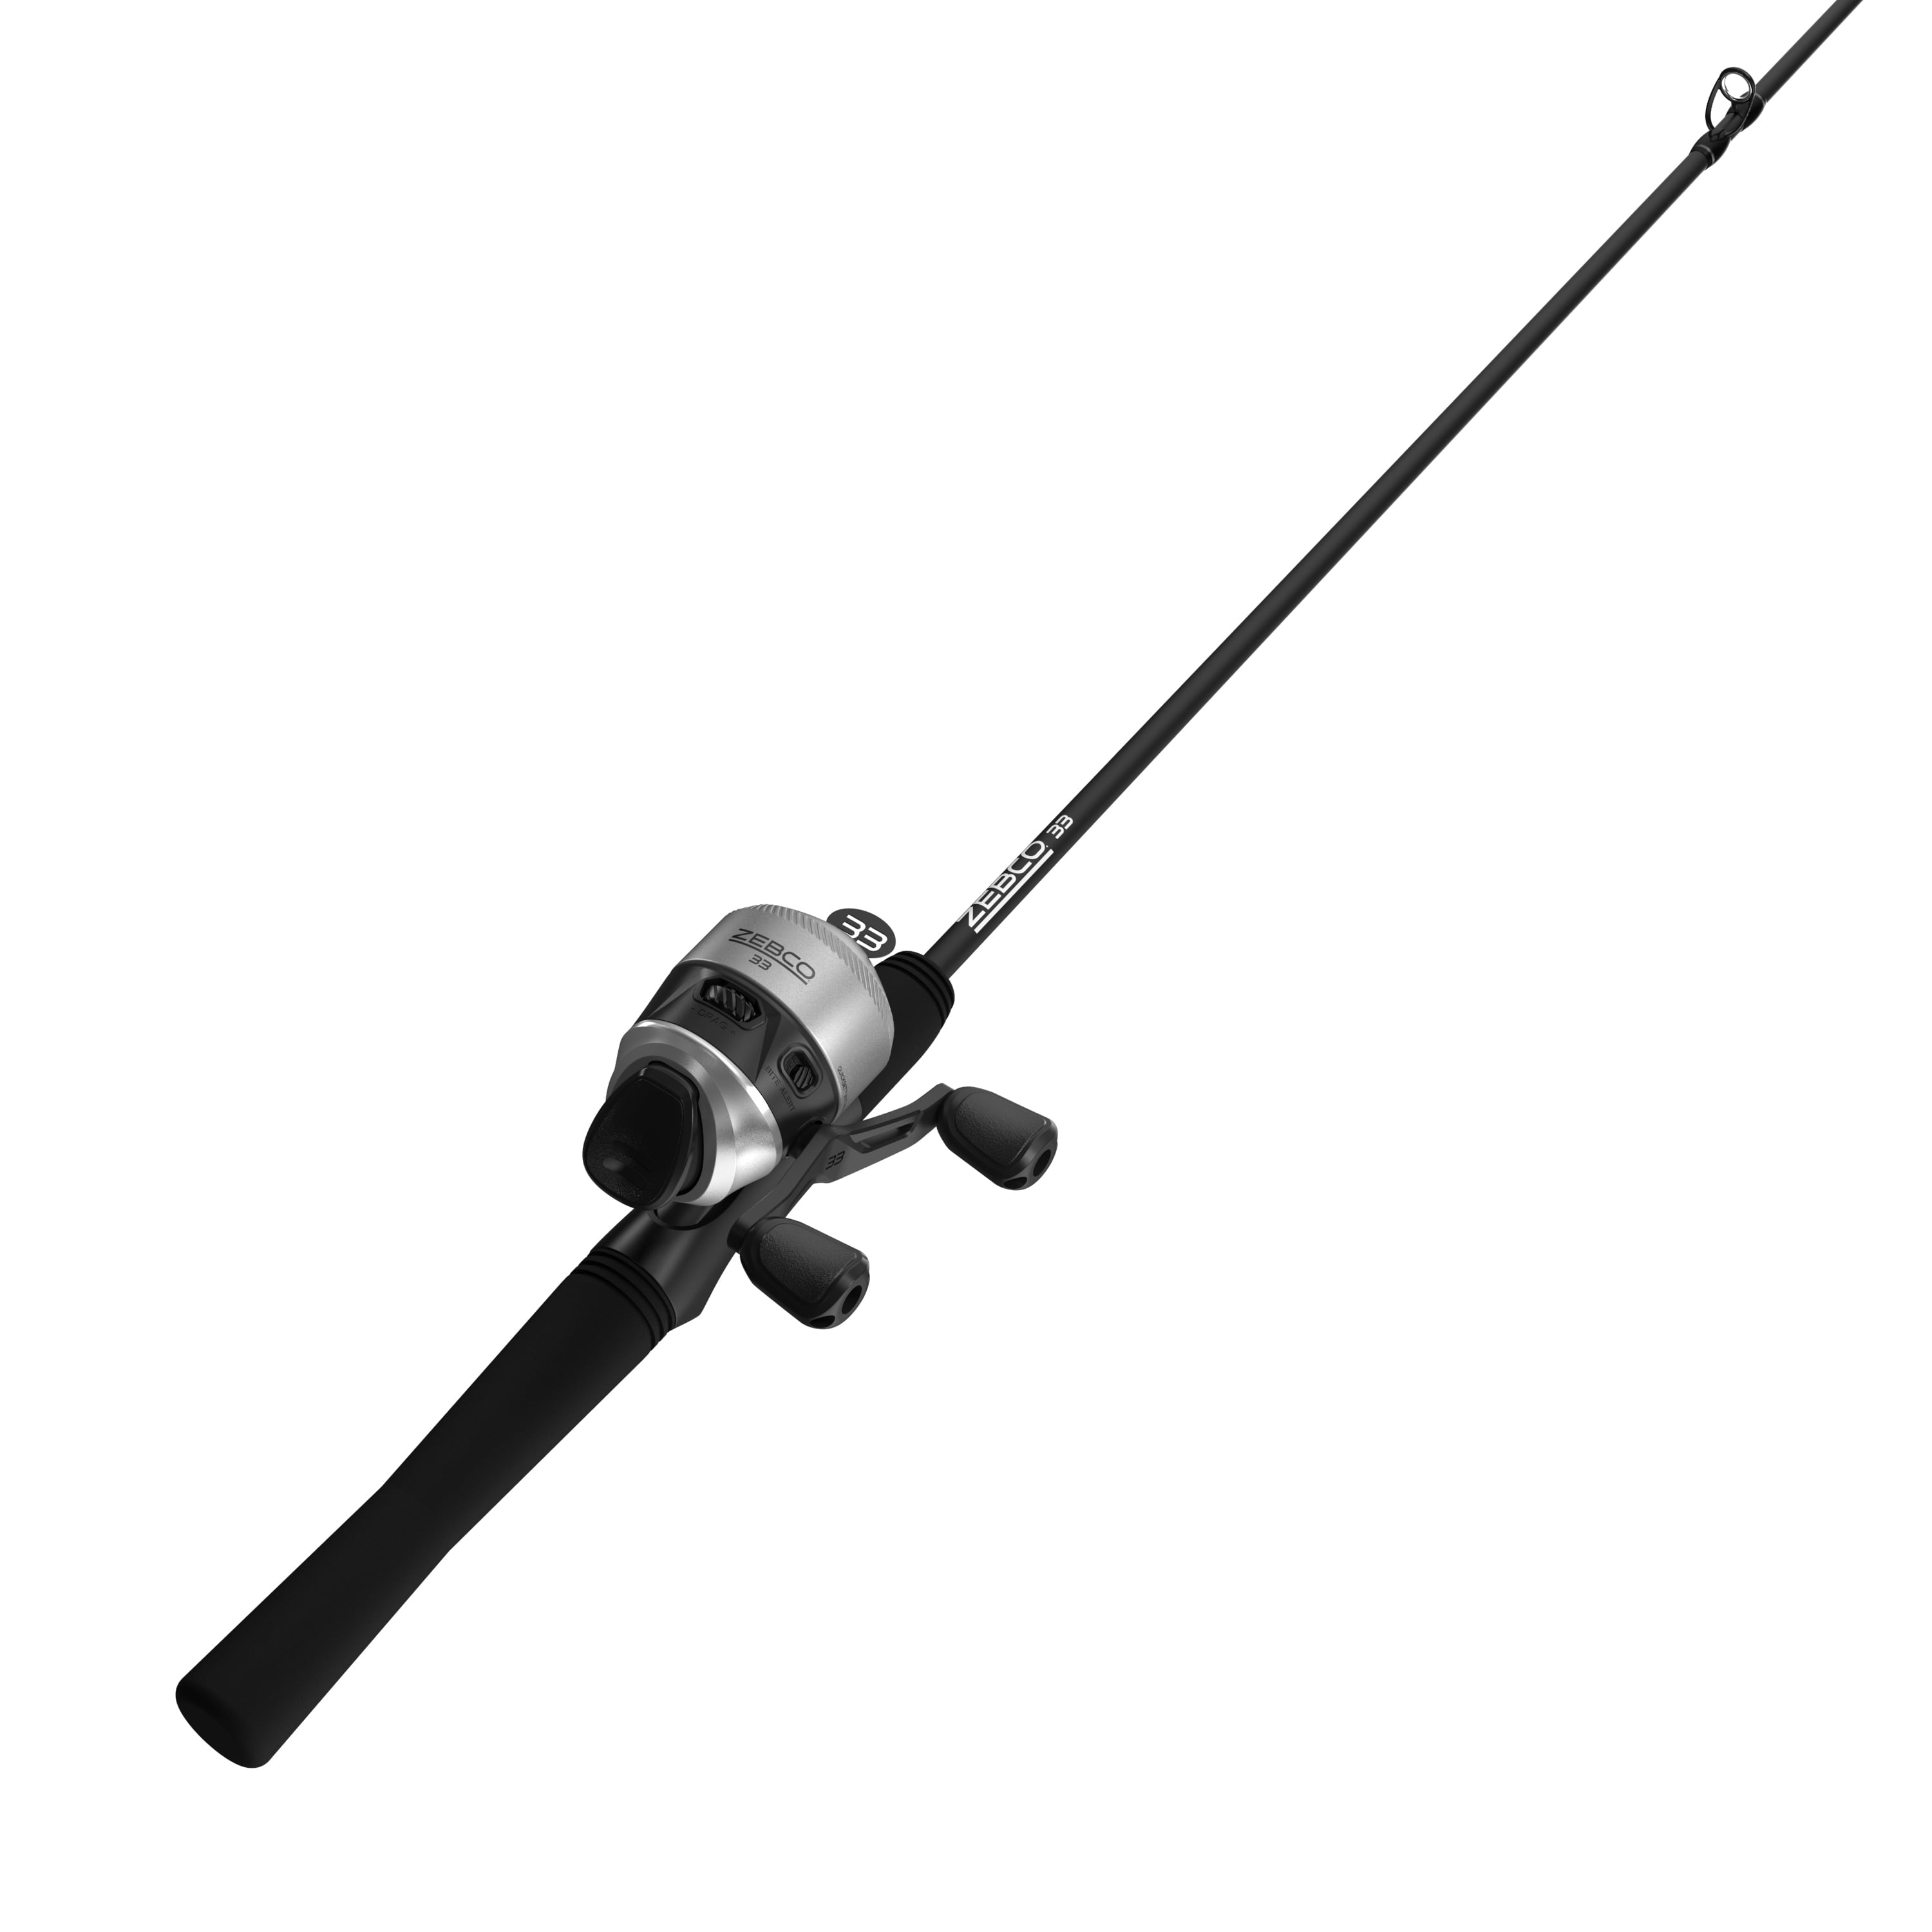 Zebco 8'0" Spinning Combo Crappie Fighter 2 pc rod Durable Orange Tip 